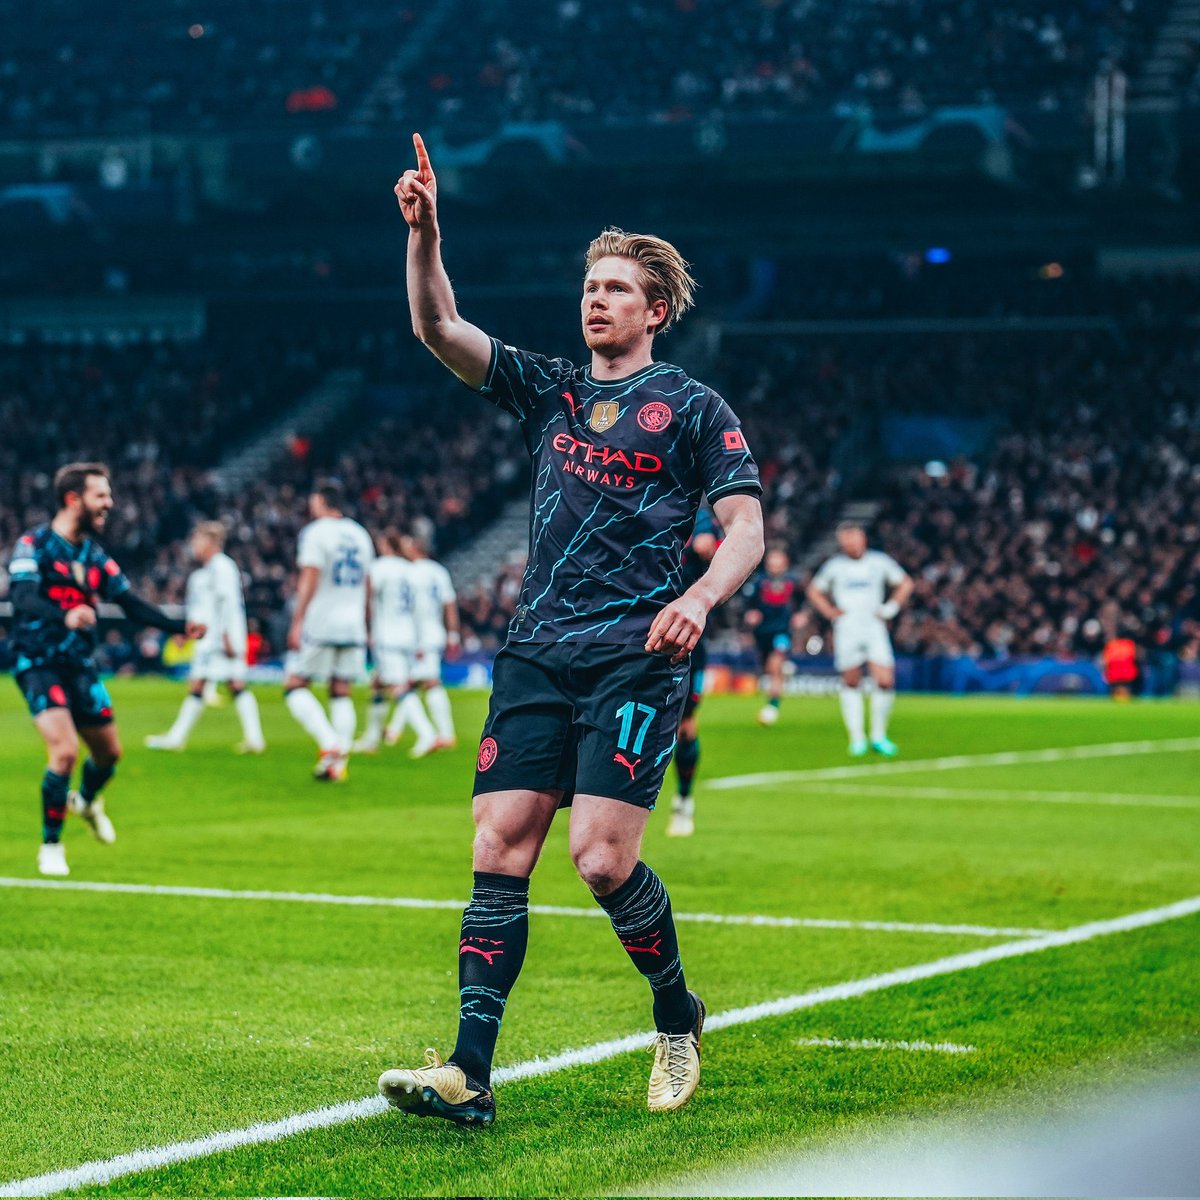 Best UEFA Champions League assists of all time 🔥🎯

A thread 🧵